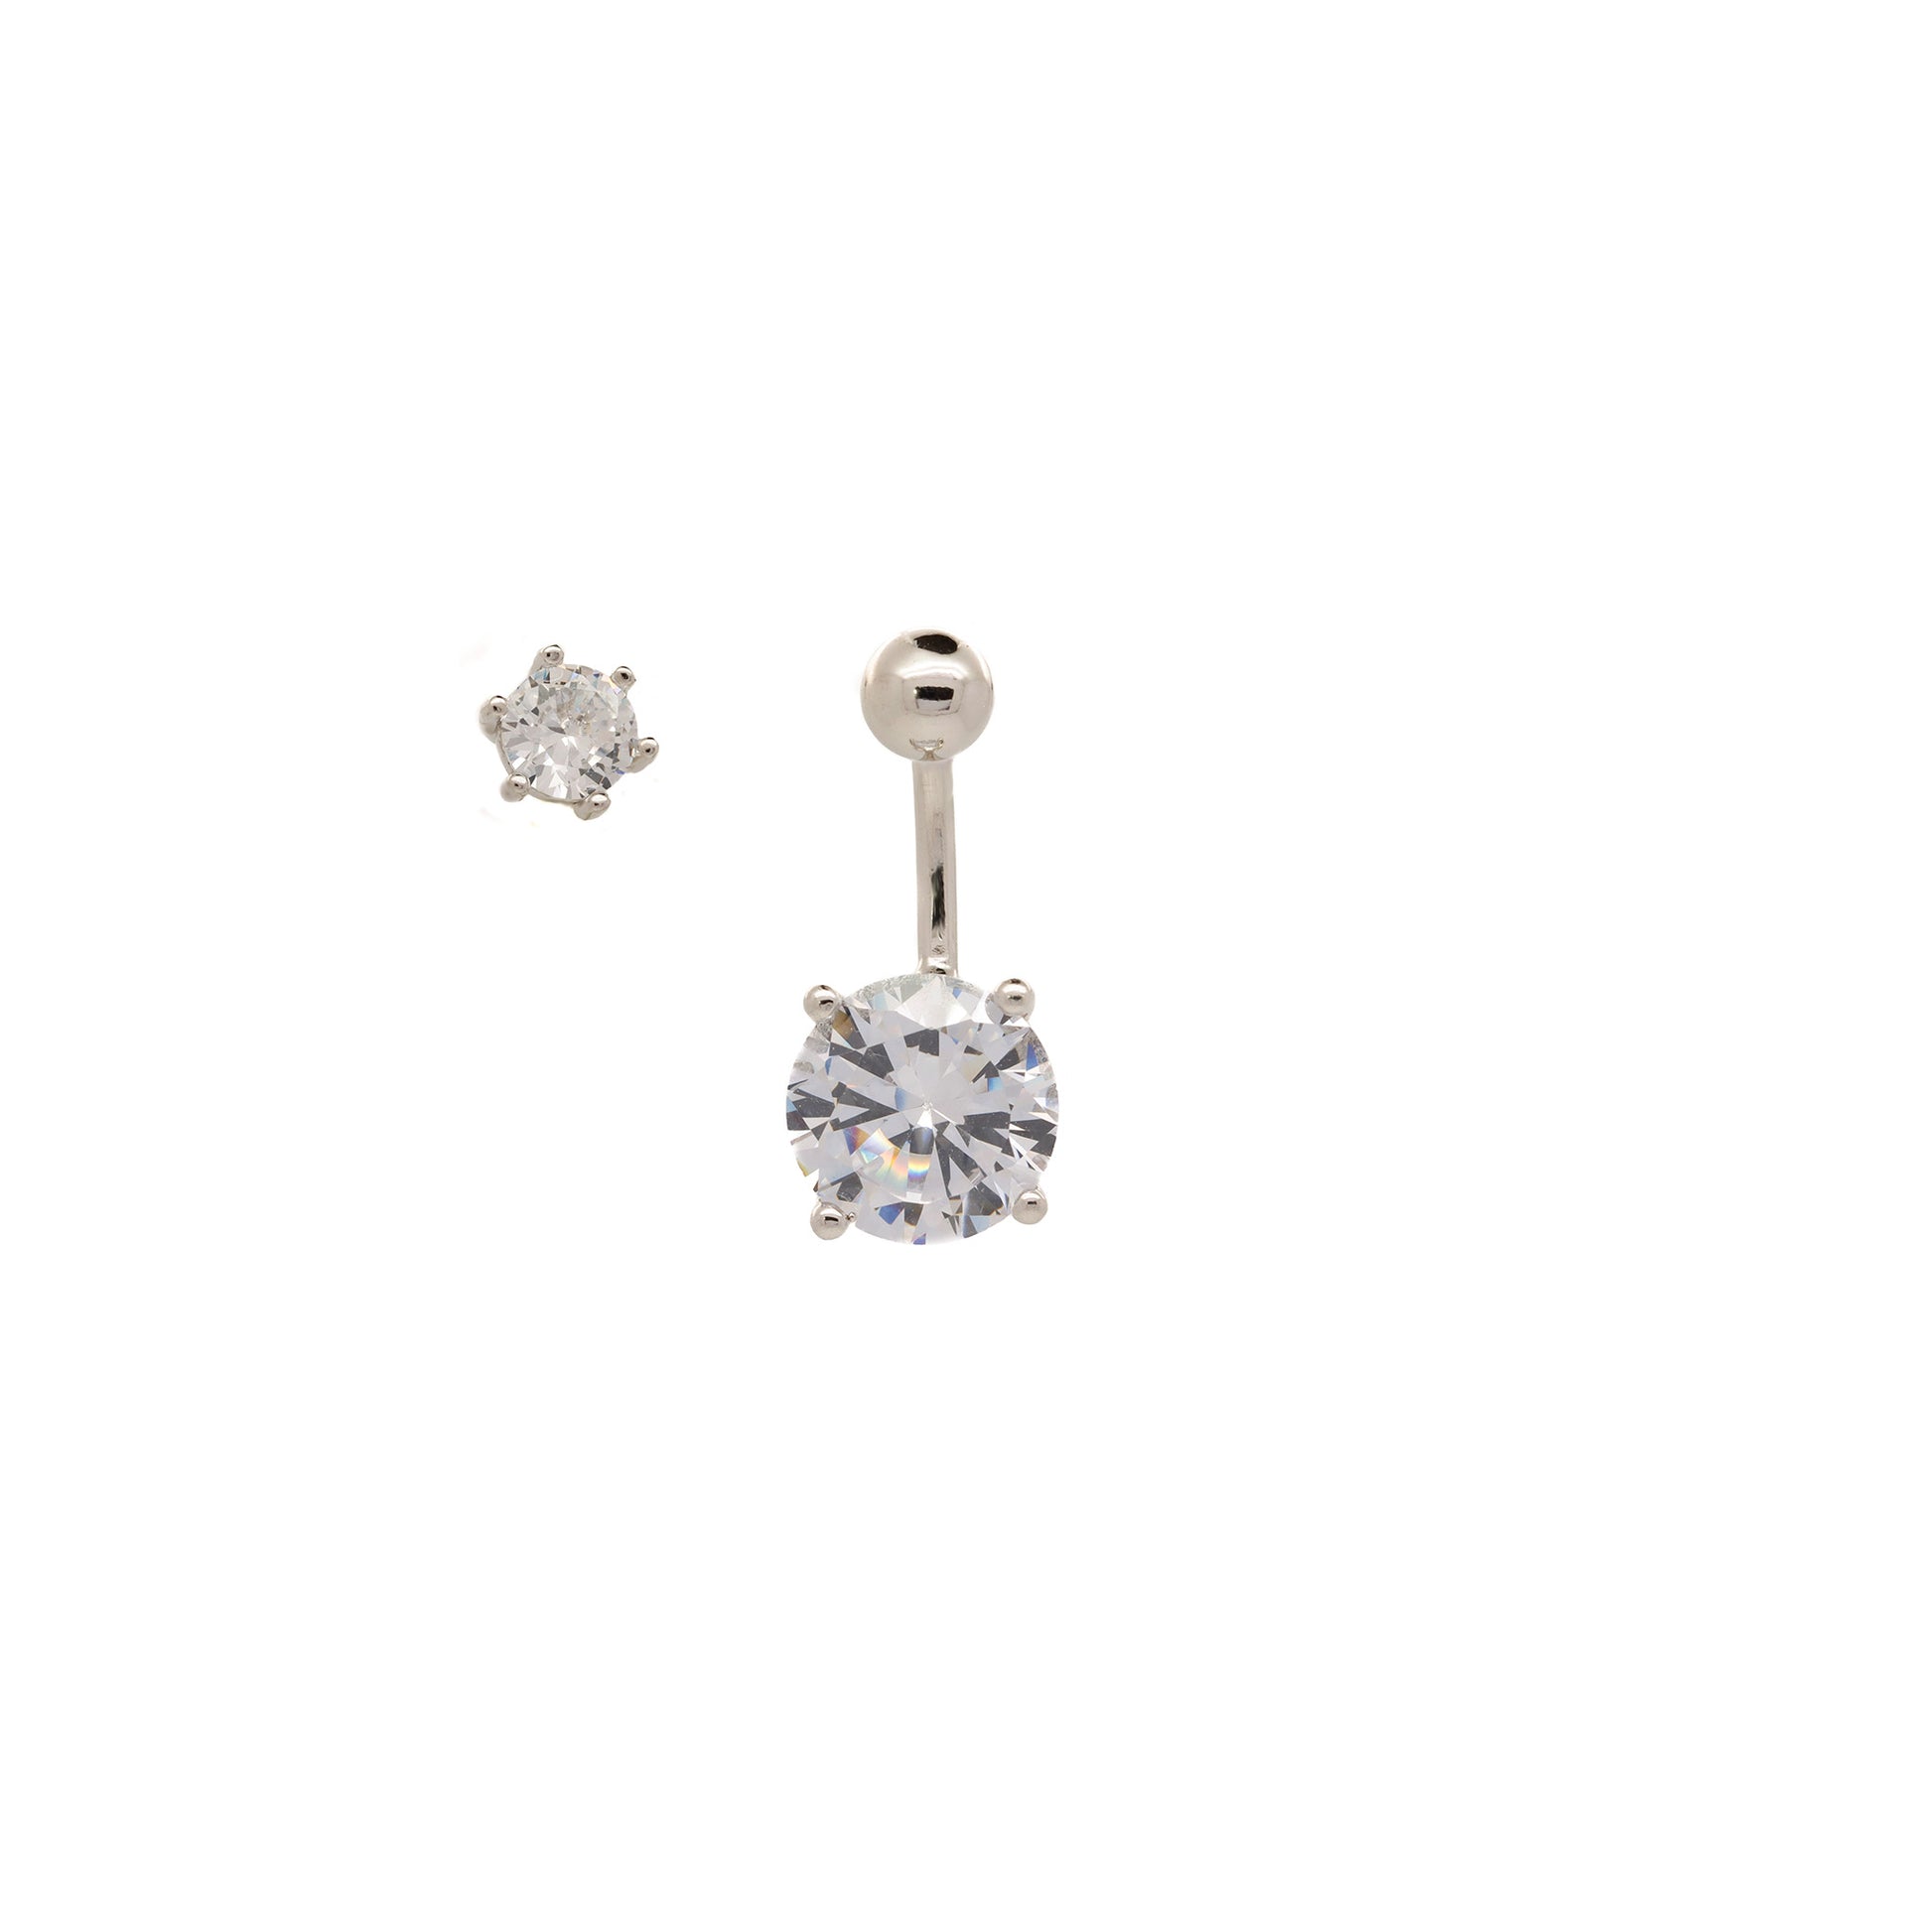 Solid 925 Silver | Solitaire Stone Belly Ring with Cubic Zirconia | 6mm 1/4" 8mm 5/16" 10mm 3/8" - Sturdy South